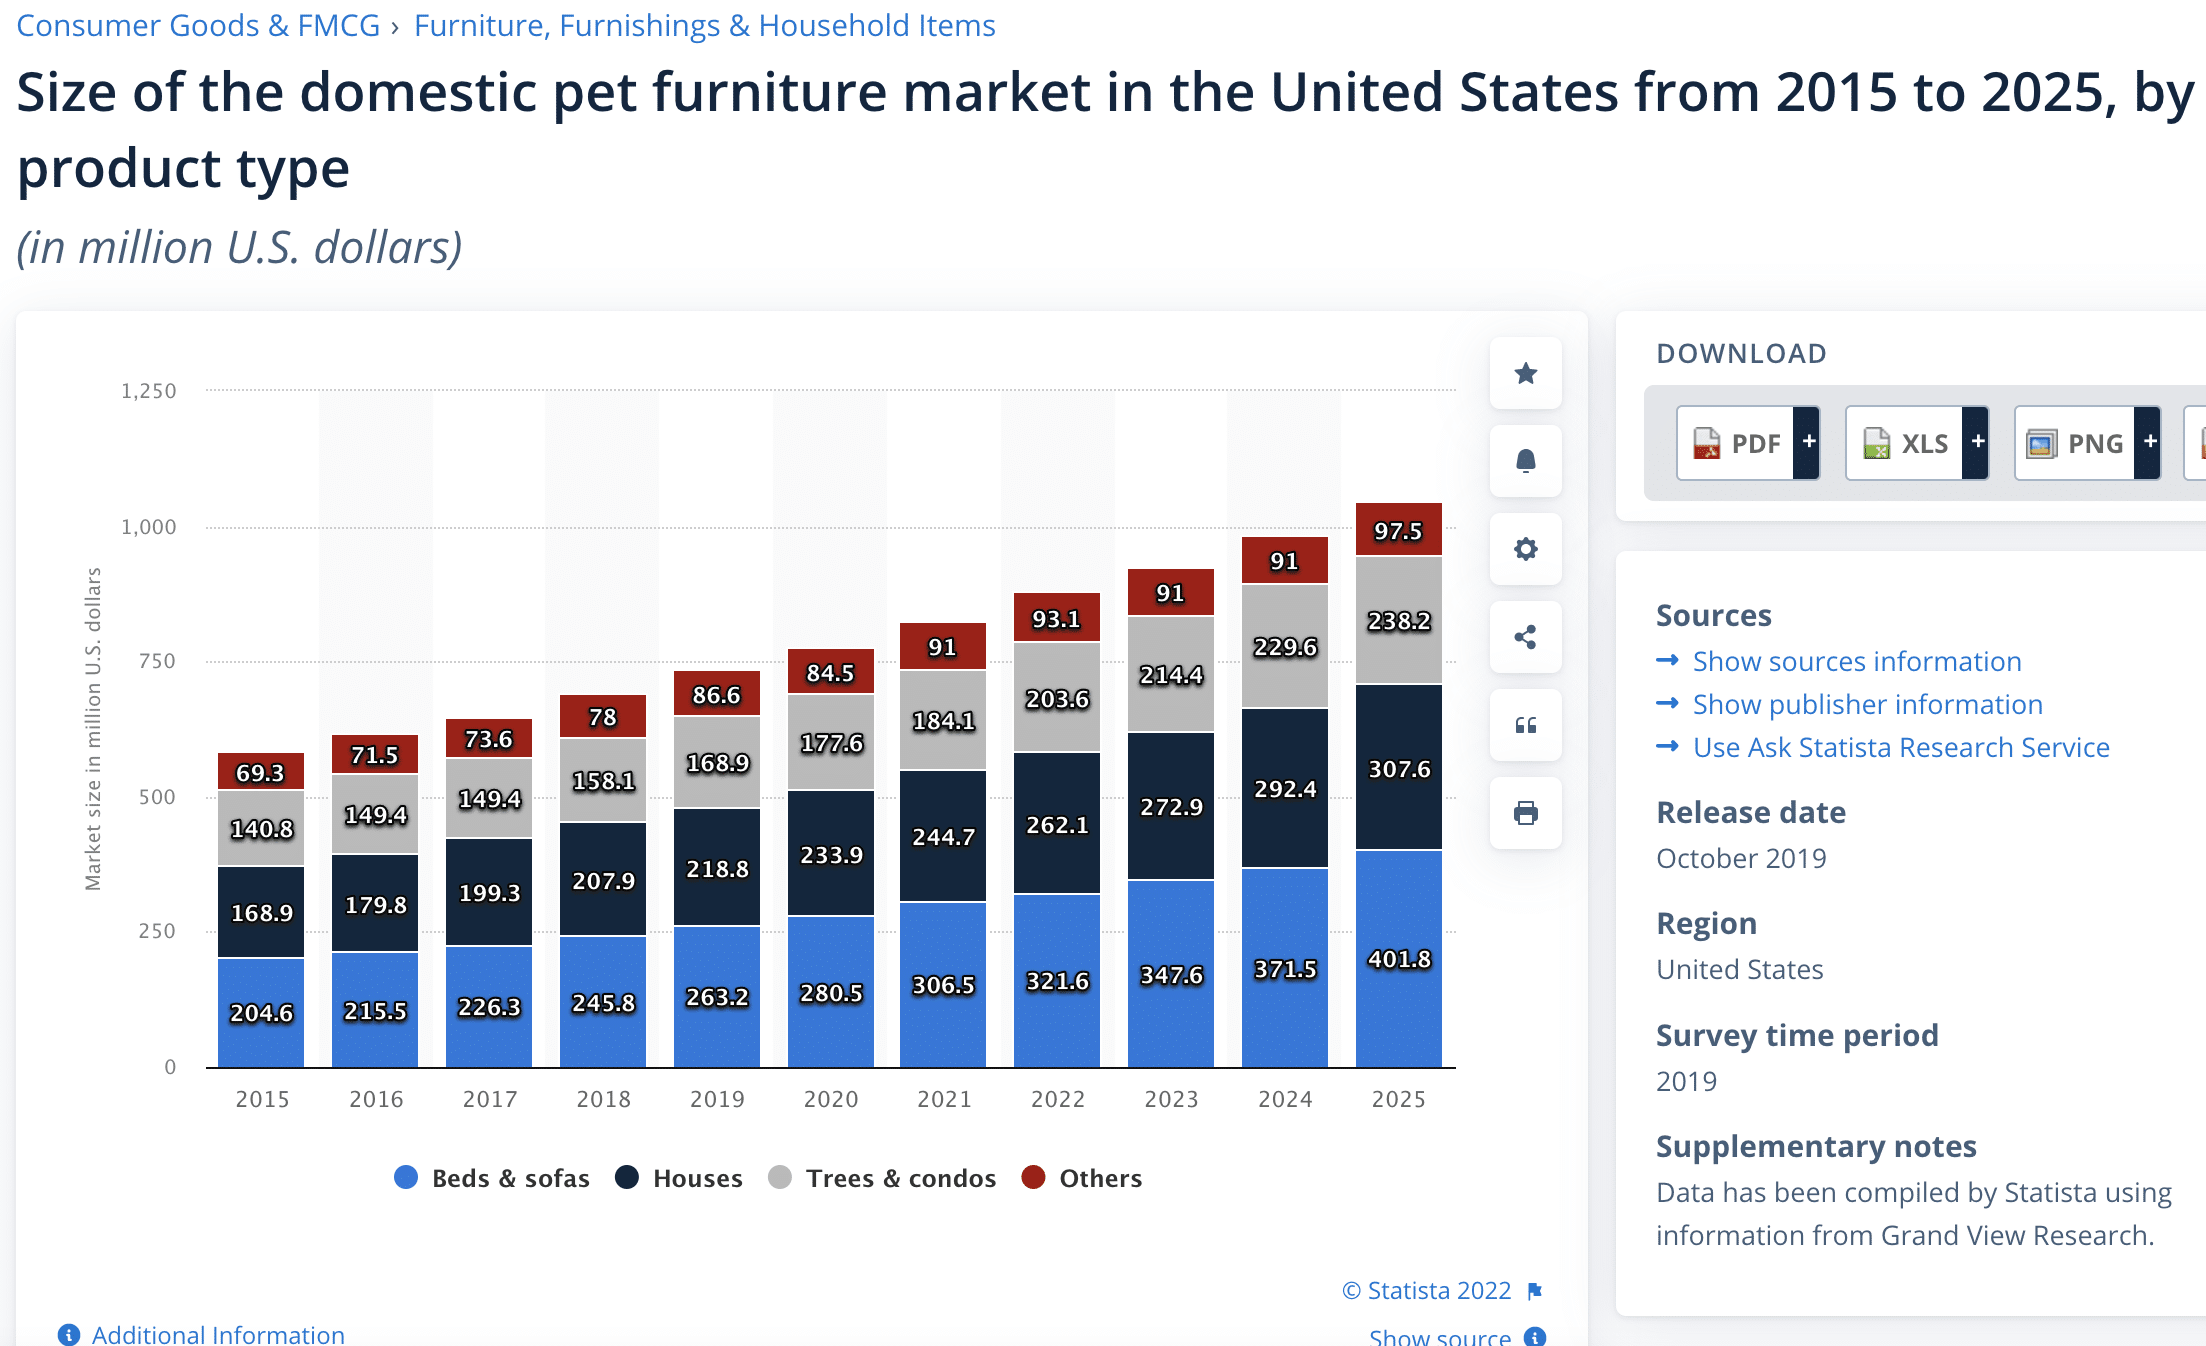 Size of the domestic pet furniture market in the United States